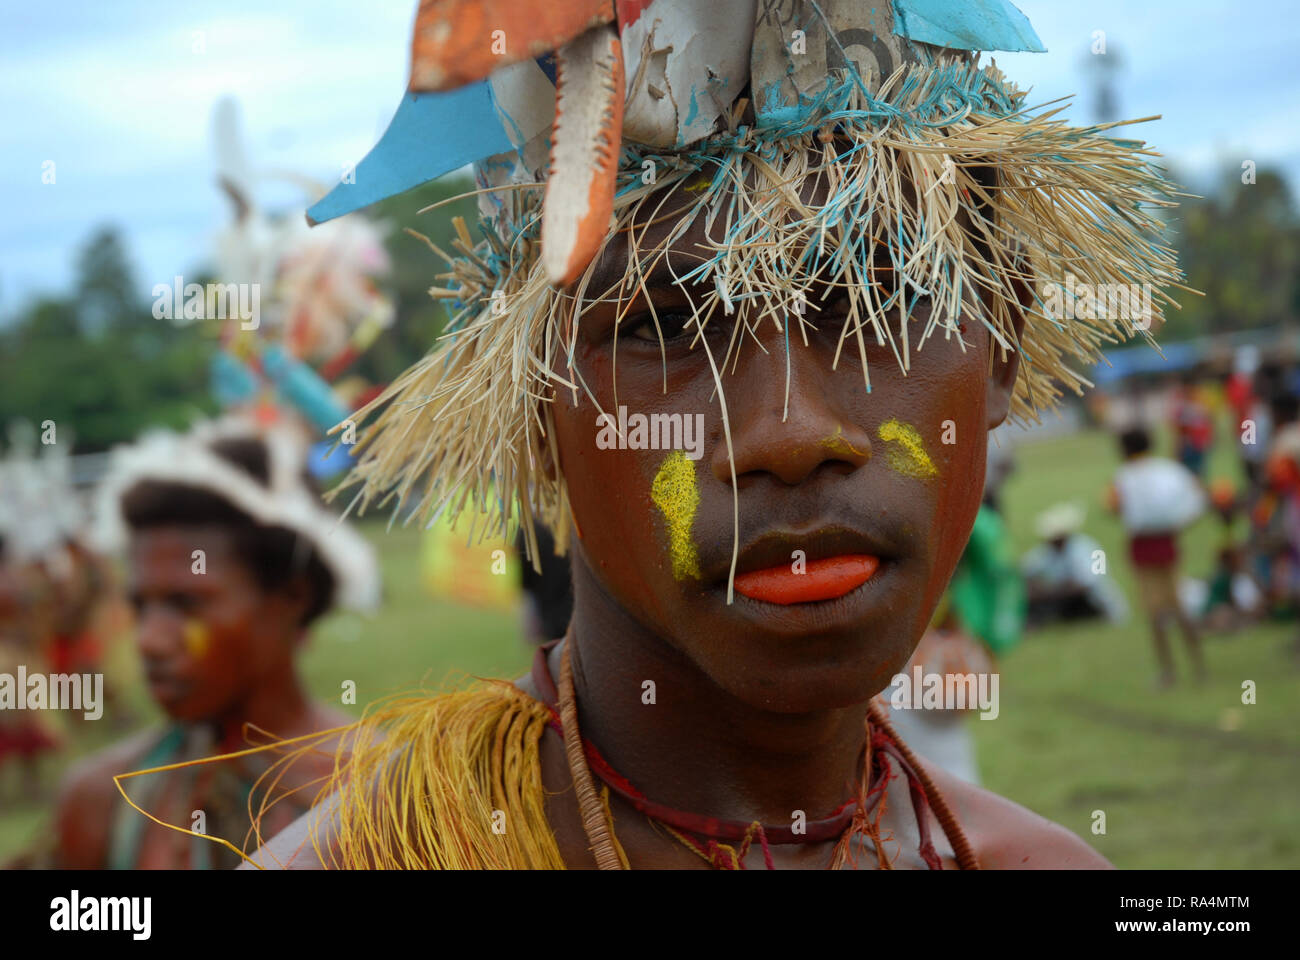 Colourfully dressed and face painted man wearing a straw hat as part of a Sing Sing in Madang, Papua New Guinea. Stock Photo